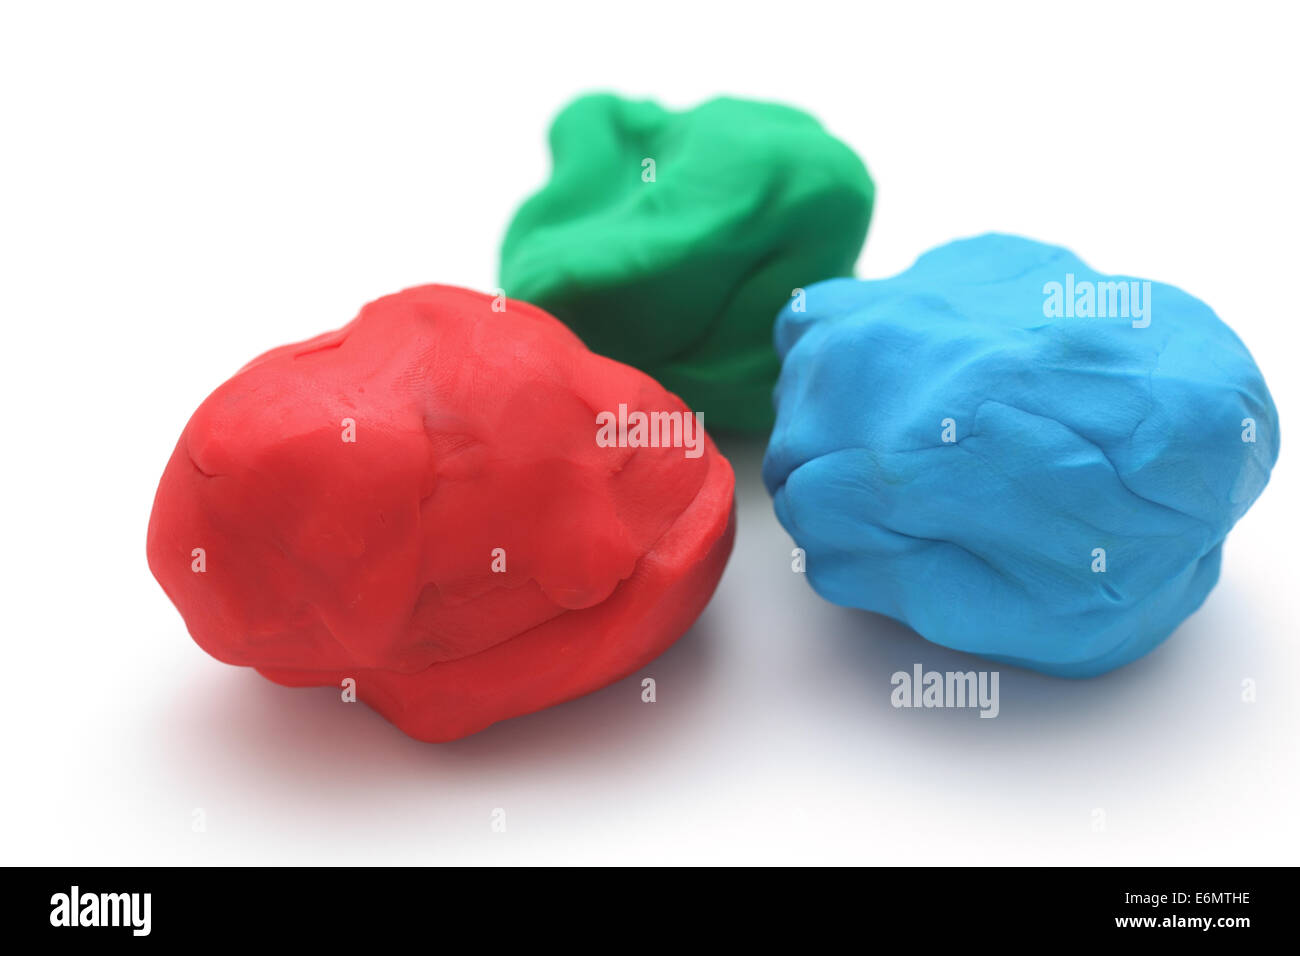 Colorful child's play clay (Red, Green, Blue). Stock Photo